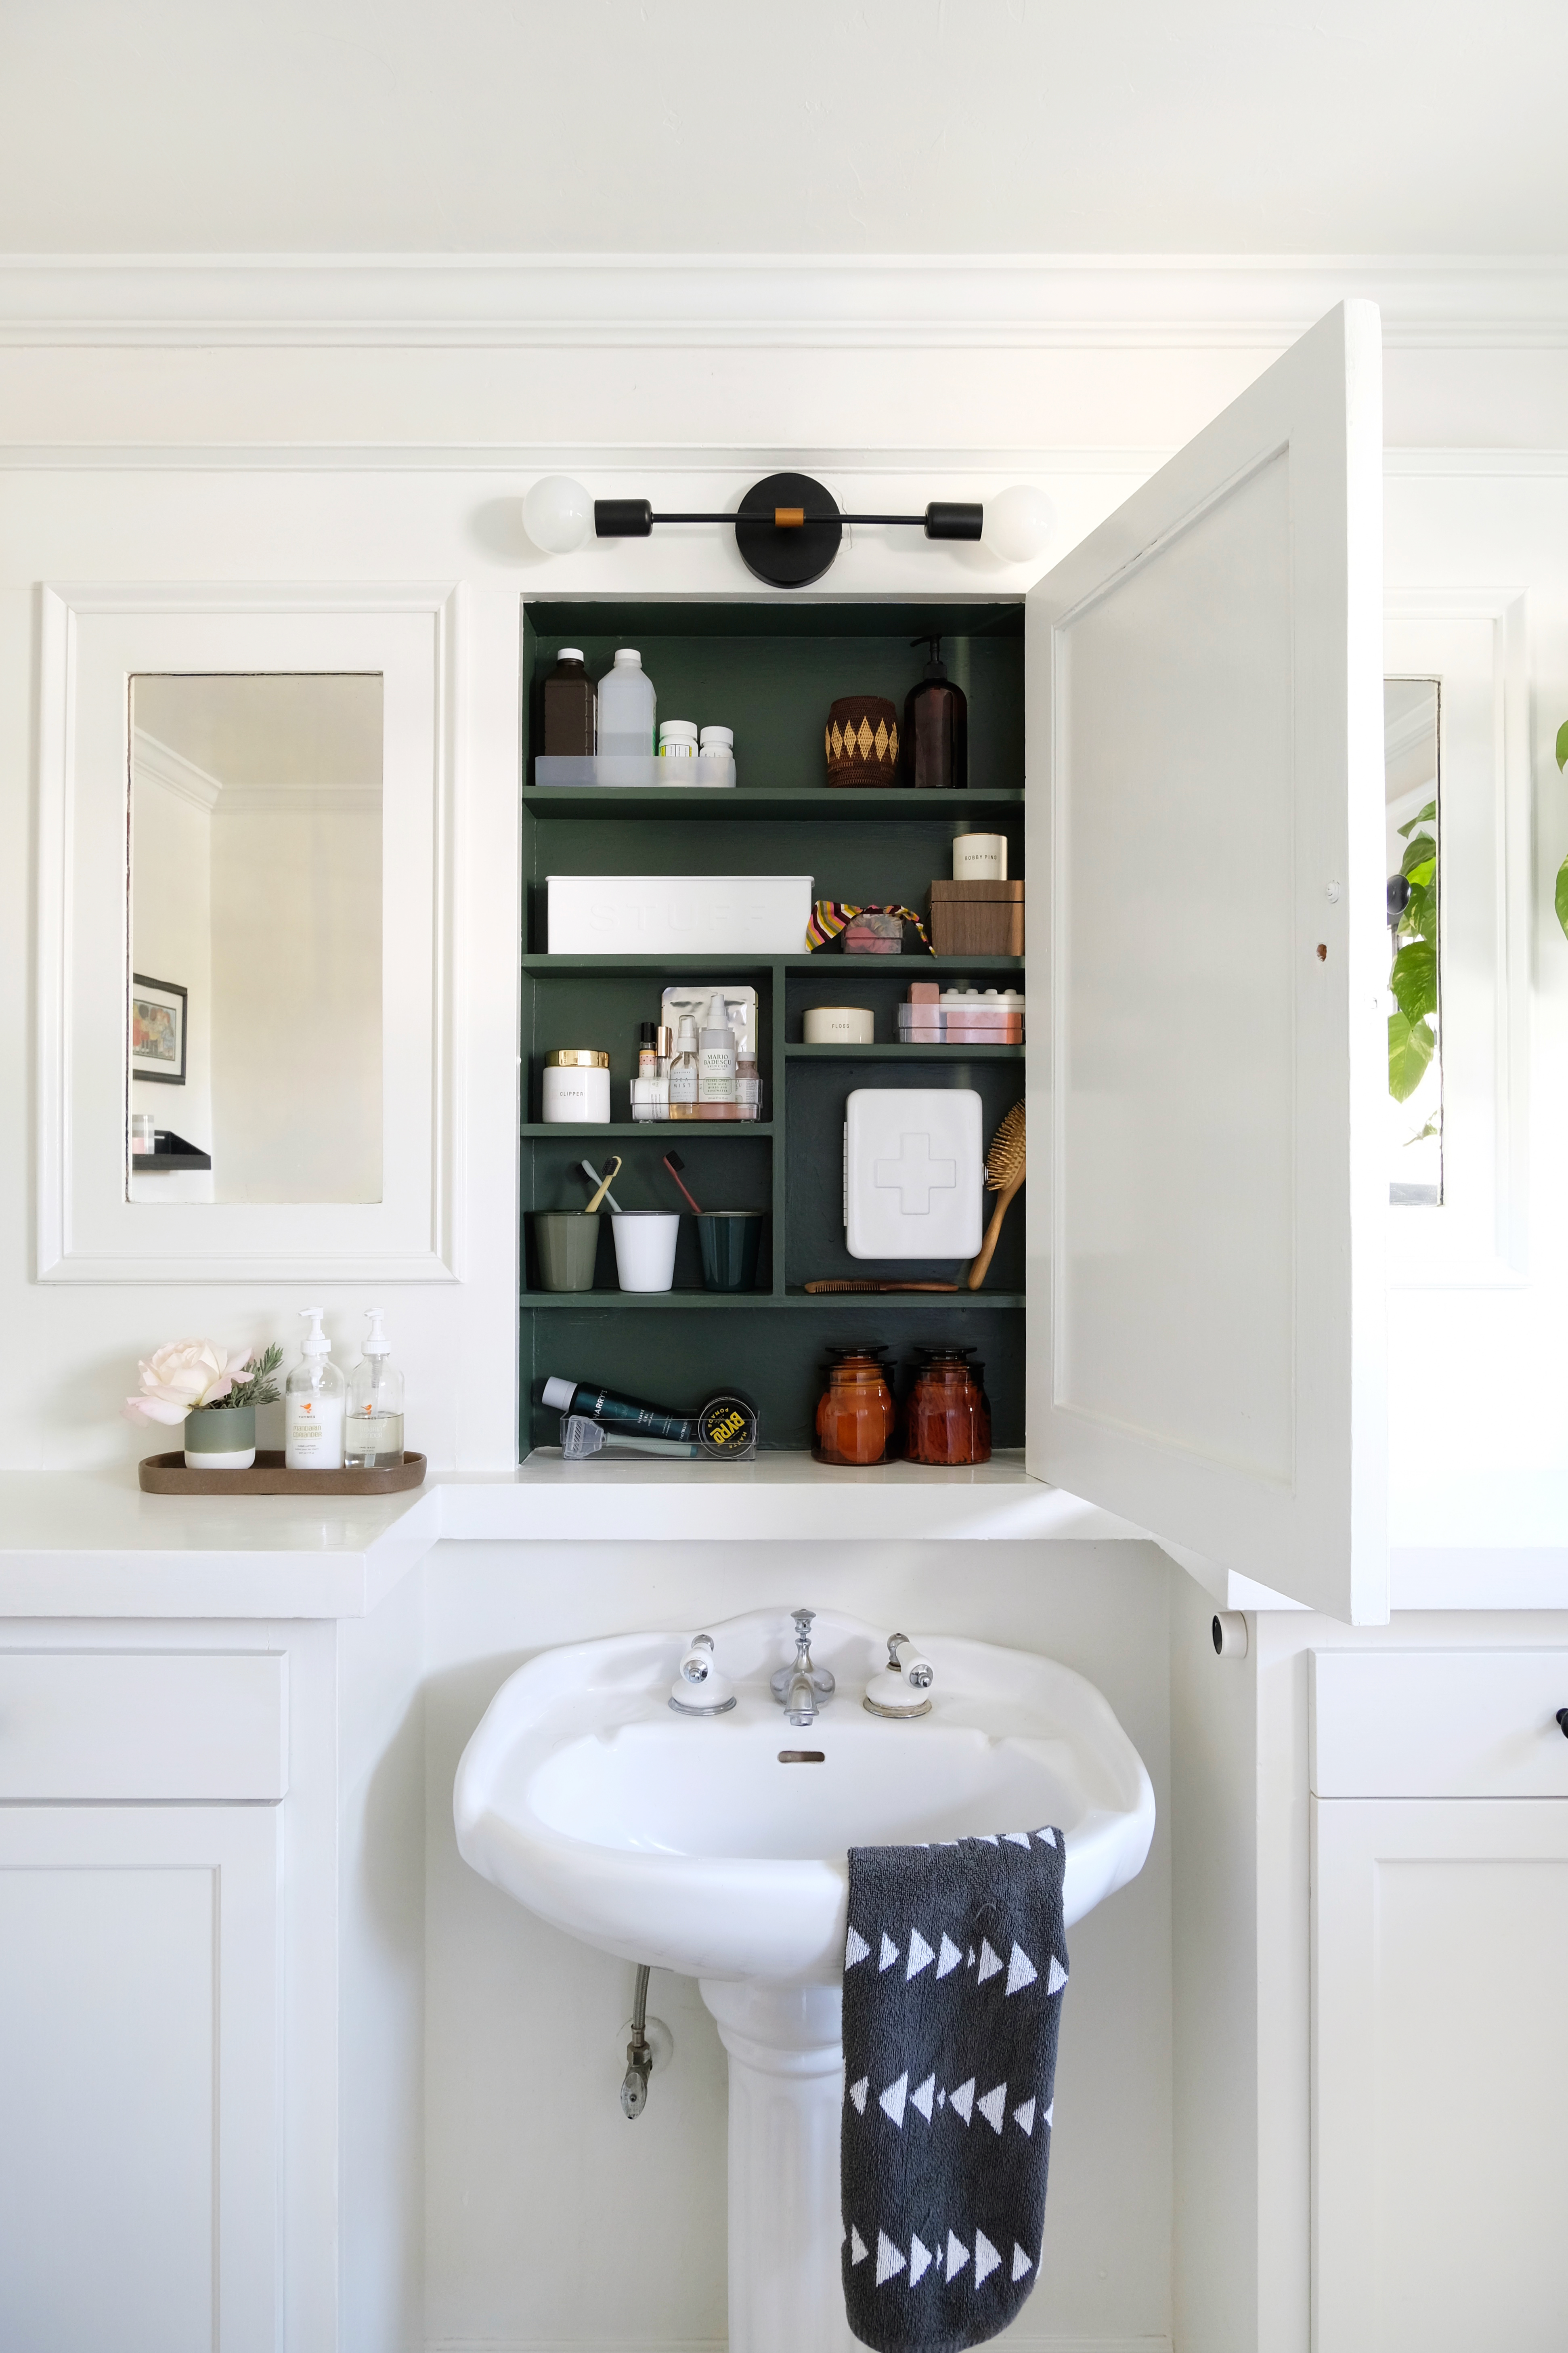 Bathroom Sink Ideas for Small Spaces